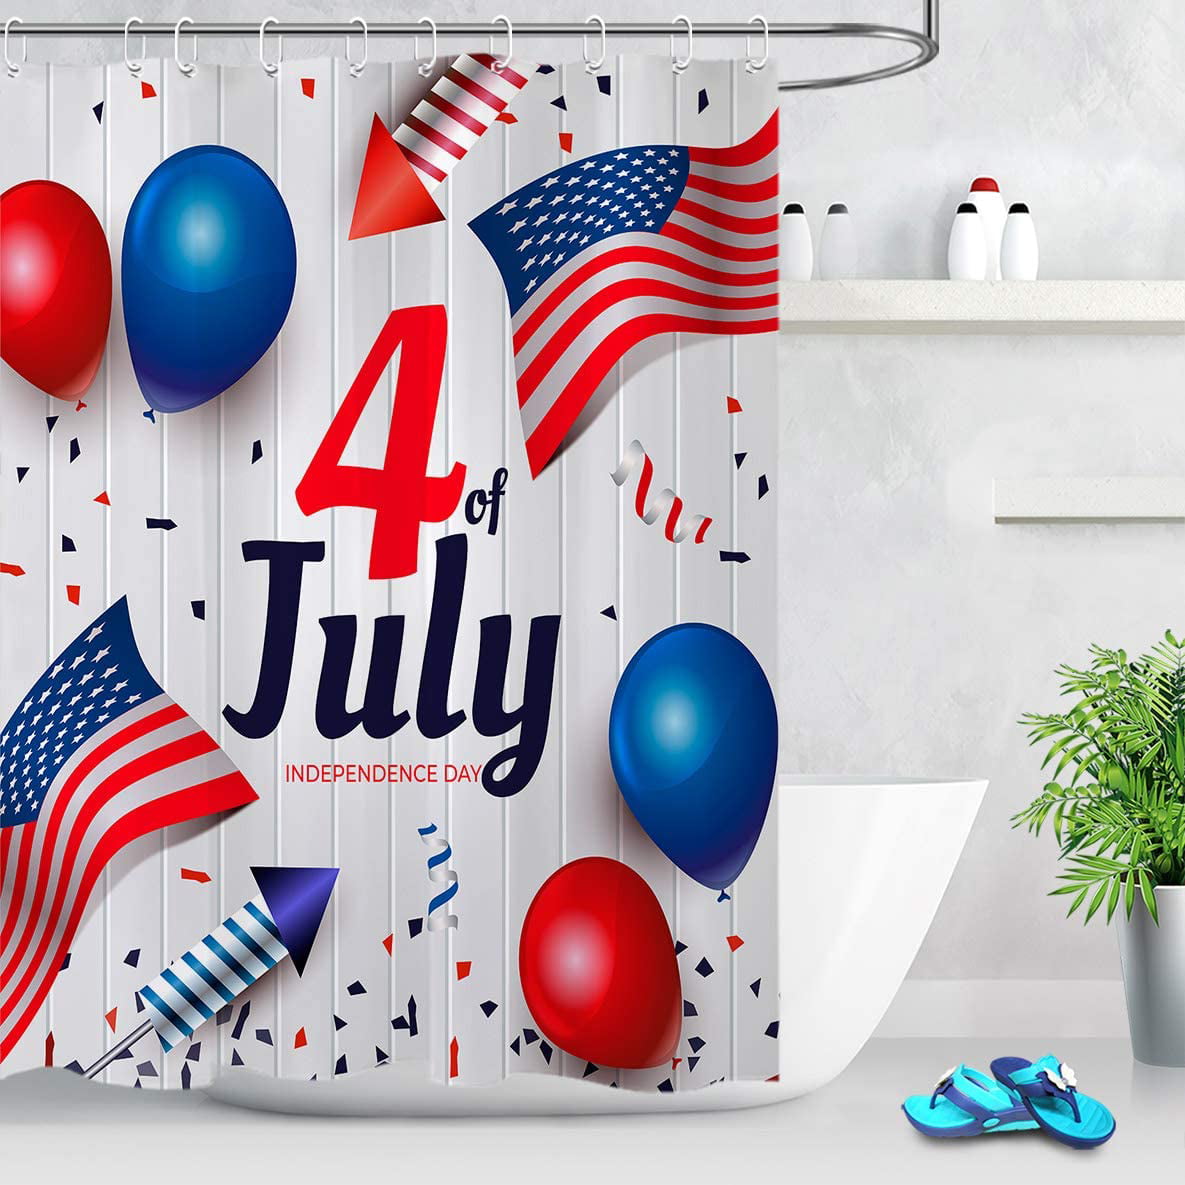 Polyester Waterproof Fabric Shower Curtain Set 72x72" Independence Day 4th July 